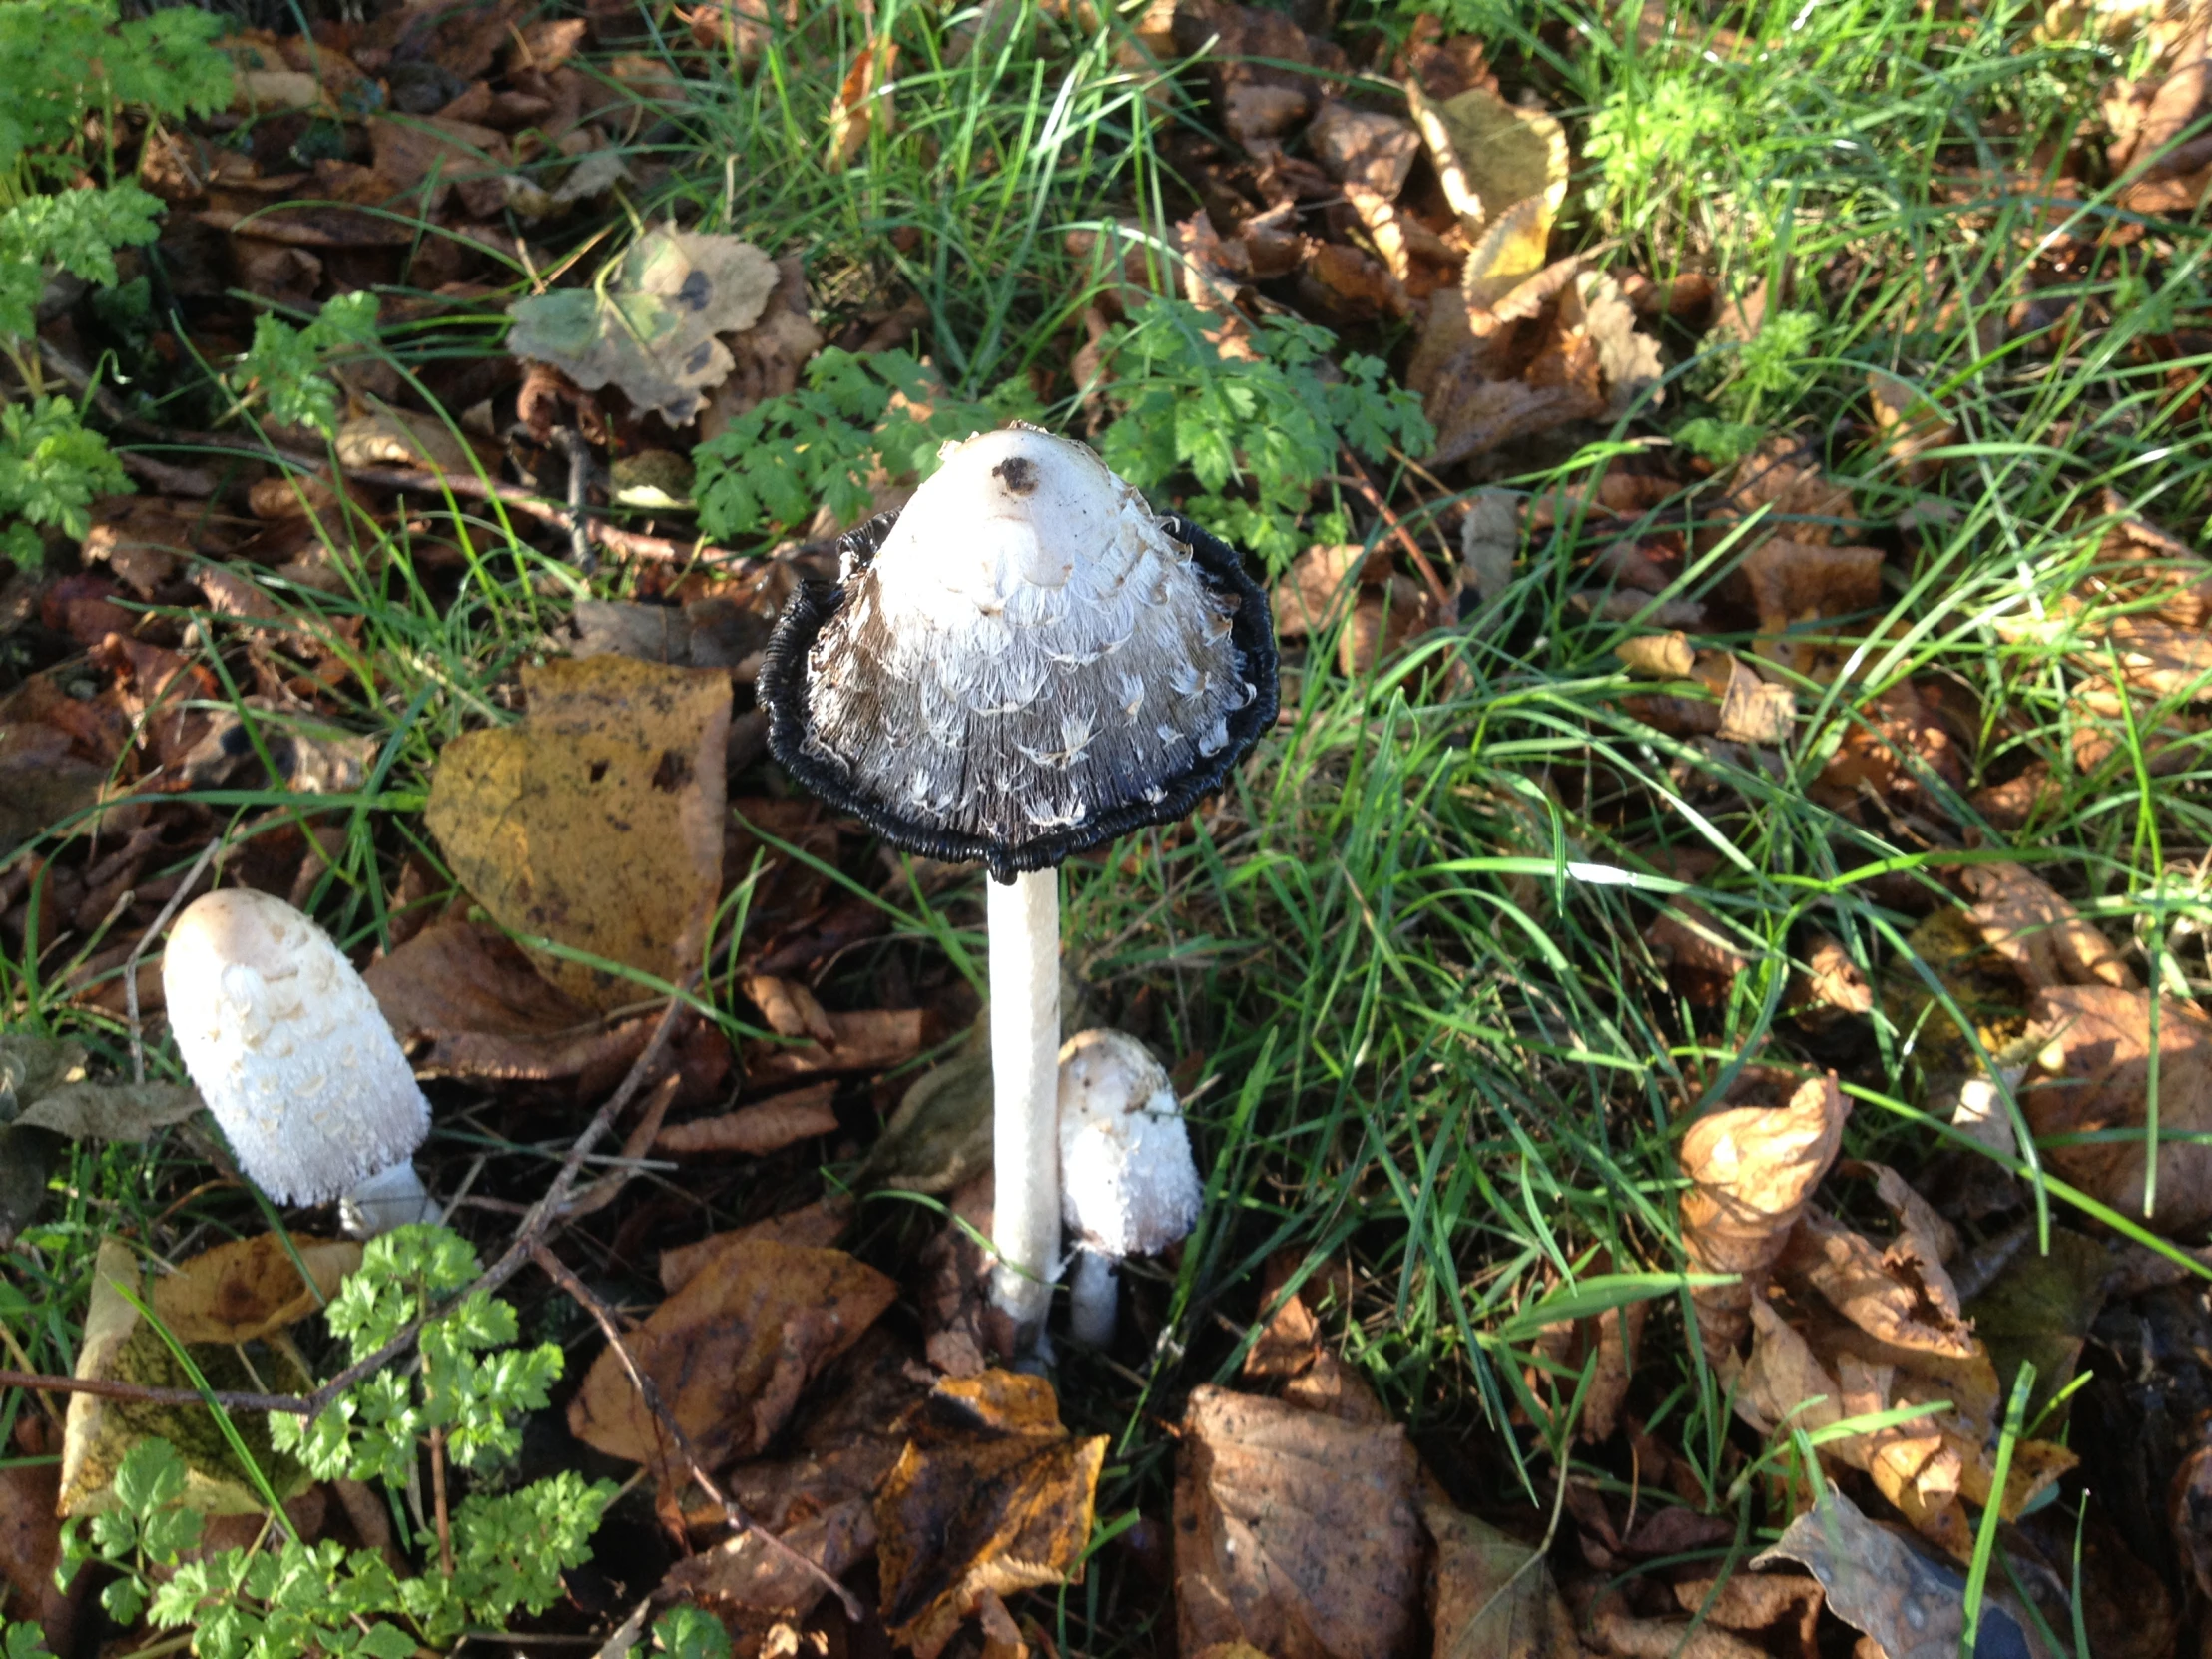 a mushroom sitting on the ground in a grassy field